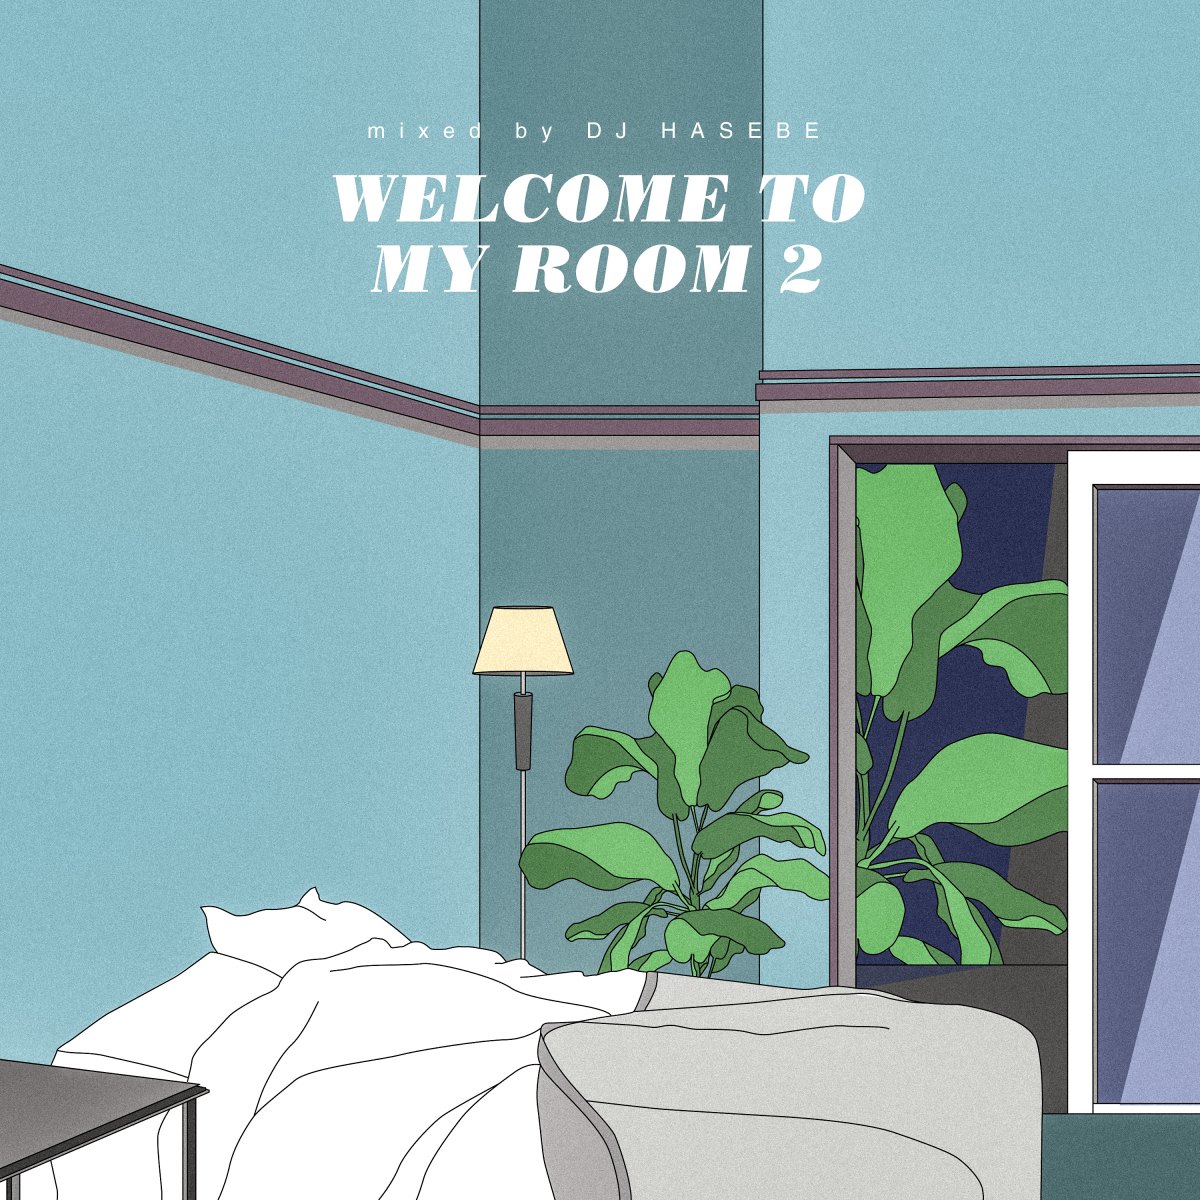 DJ HASEBEのMIX企画『Welcome to my room 2』が配信リリース。5月には ...